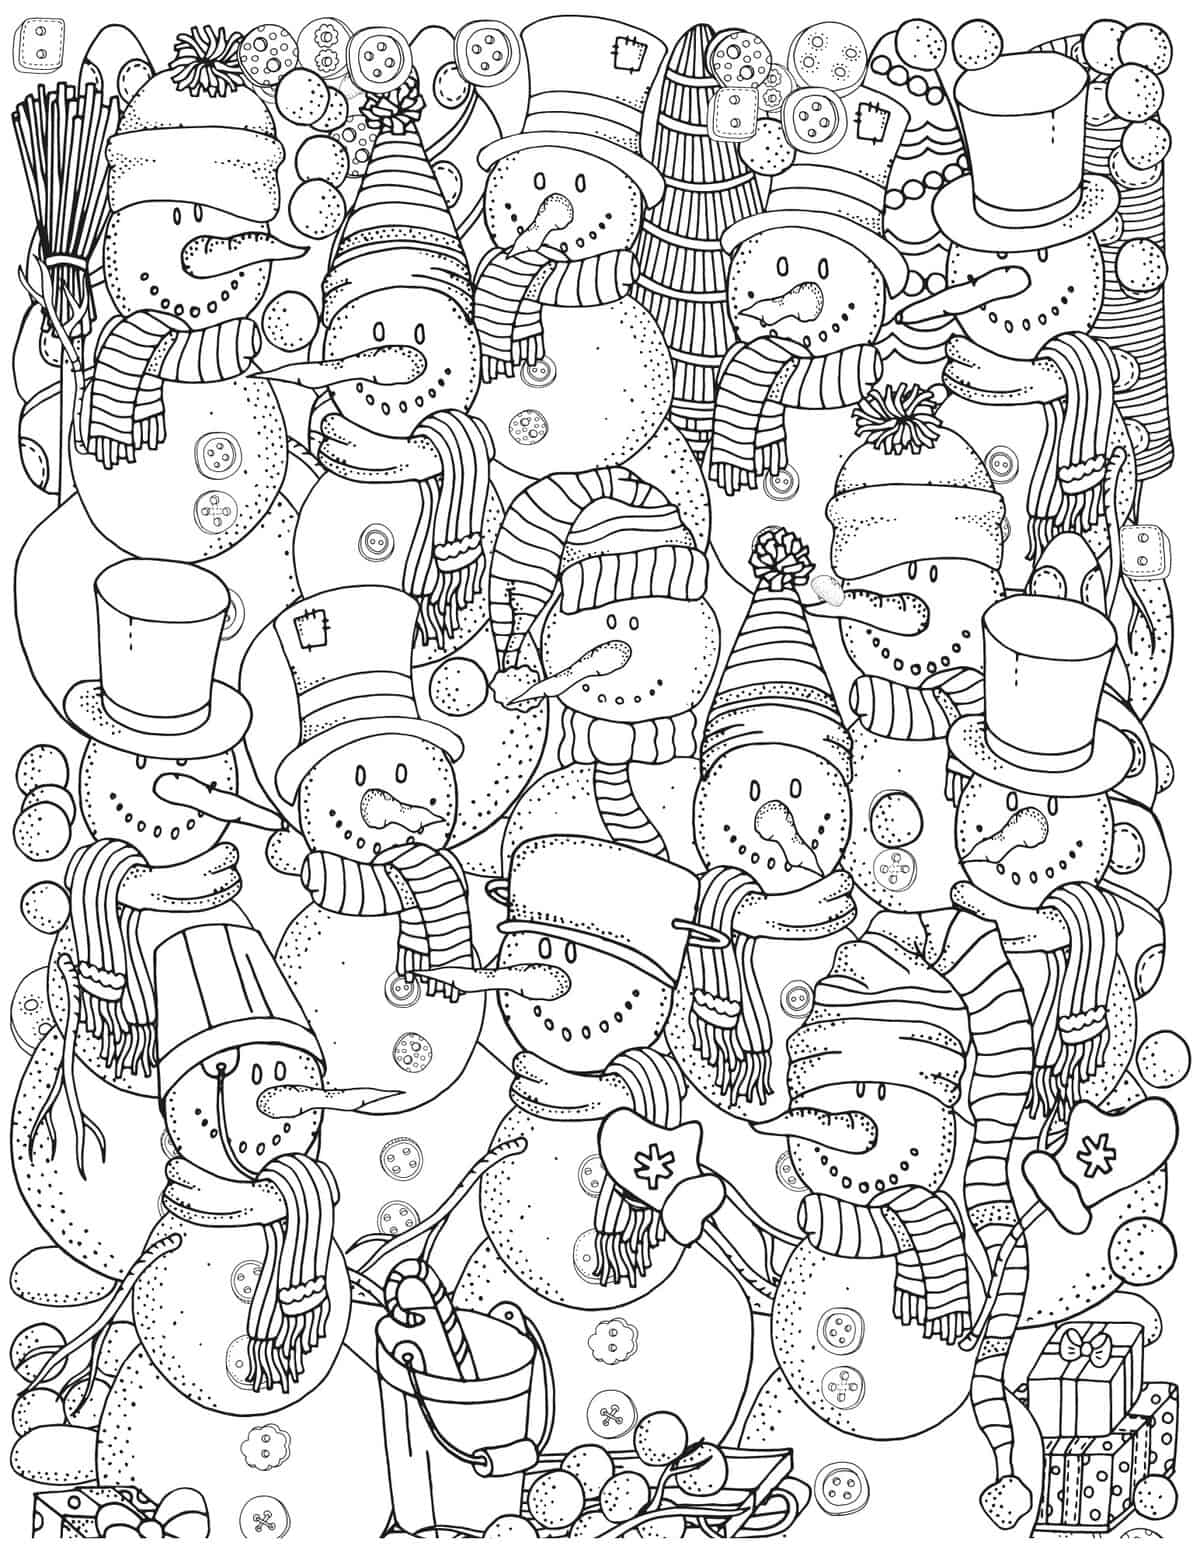 christmas coloring pages snowman cute